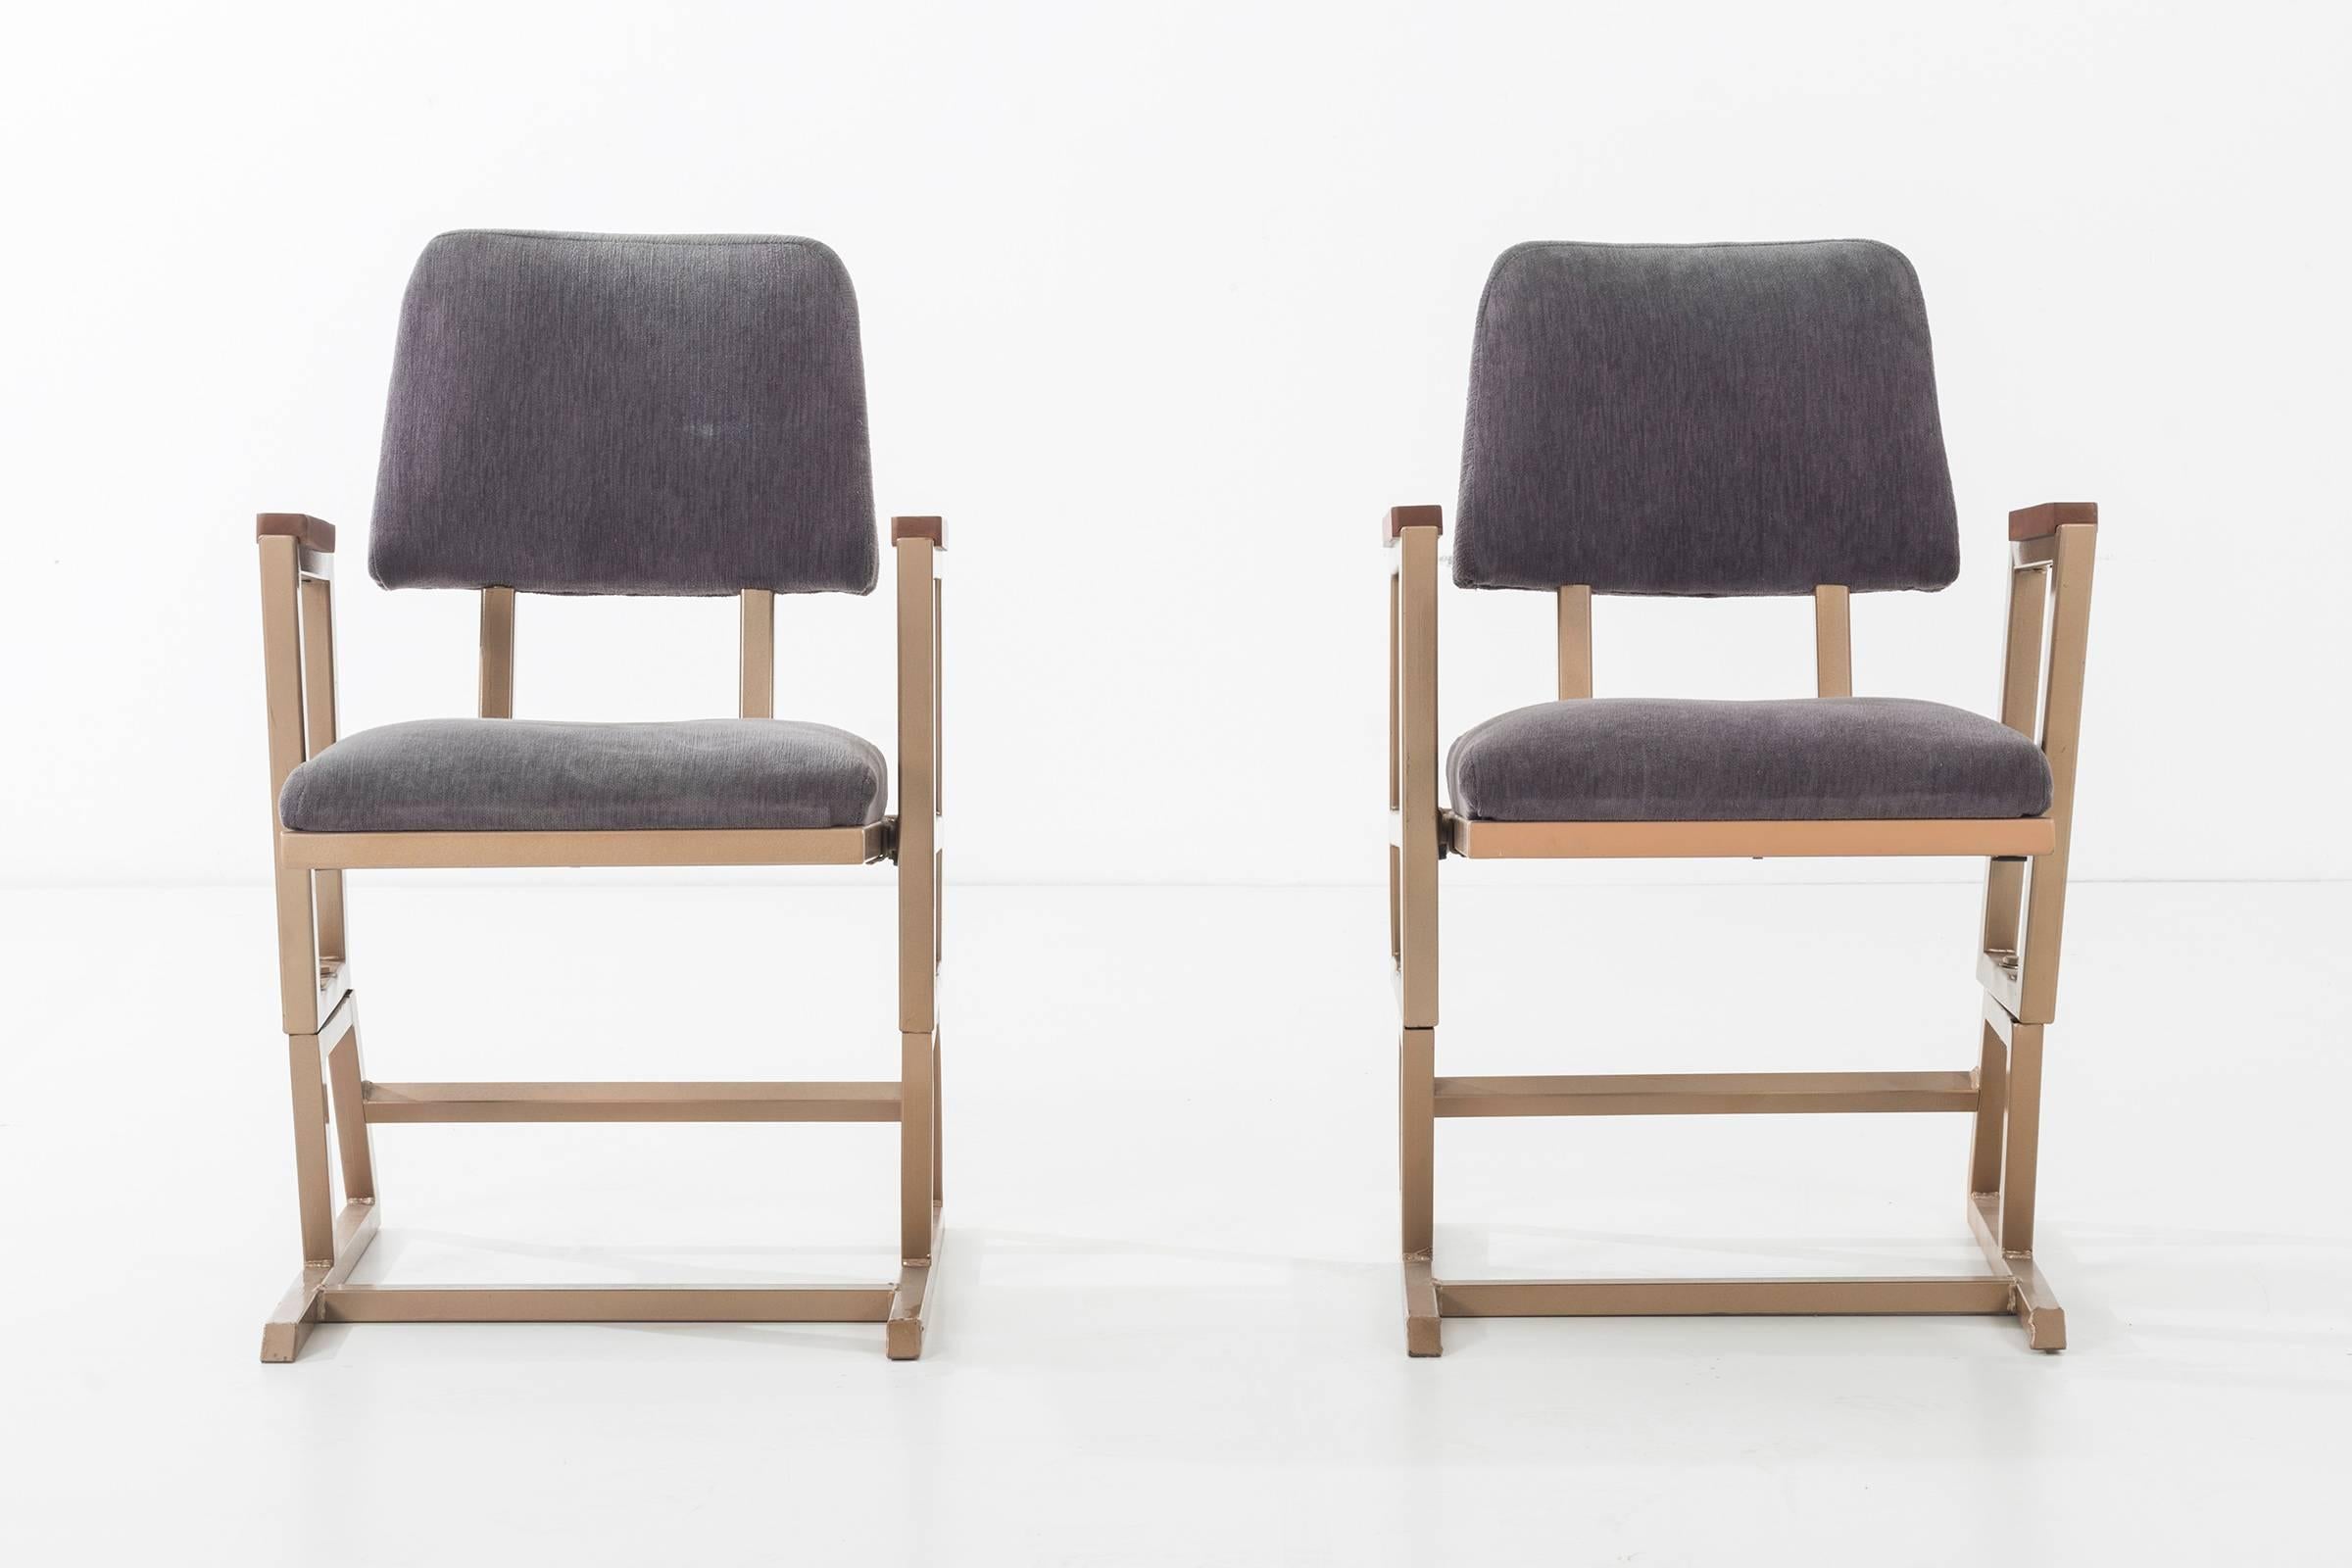 Frank Lloyd Wright, pair of chairs from the Kalita Humphreys Theater, Dallas Texas.
Literature: Frank Lloyd Wright Monograph 1951-1959, Pfeiffer and Futugawa, ppg. 206-208.
             